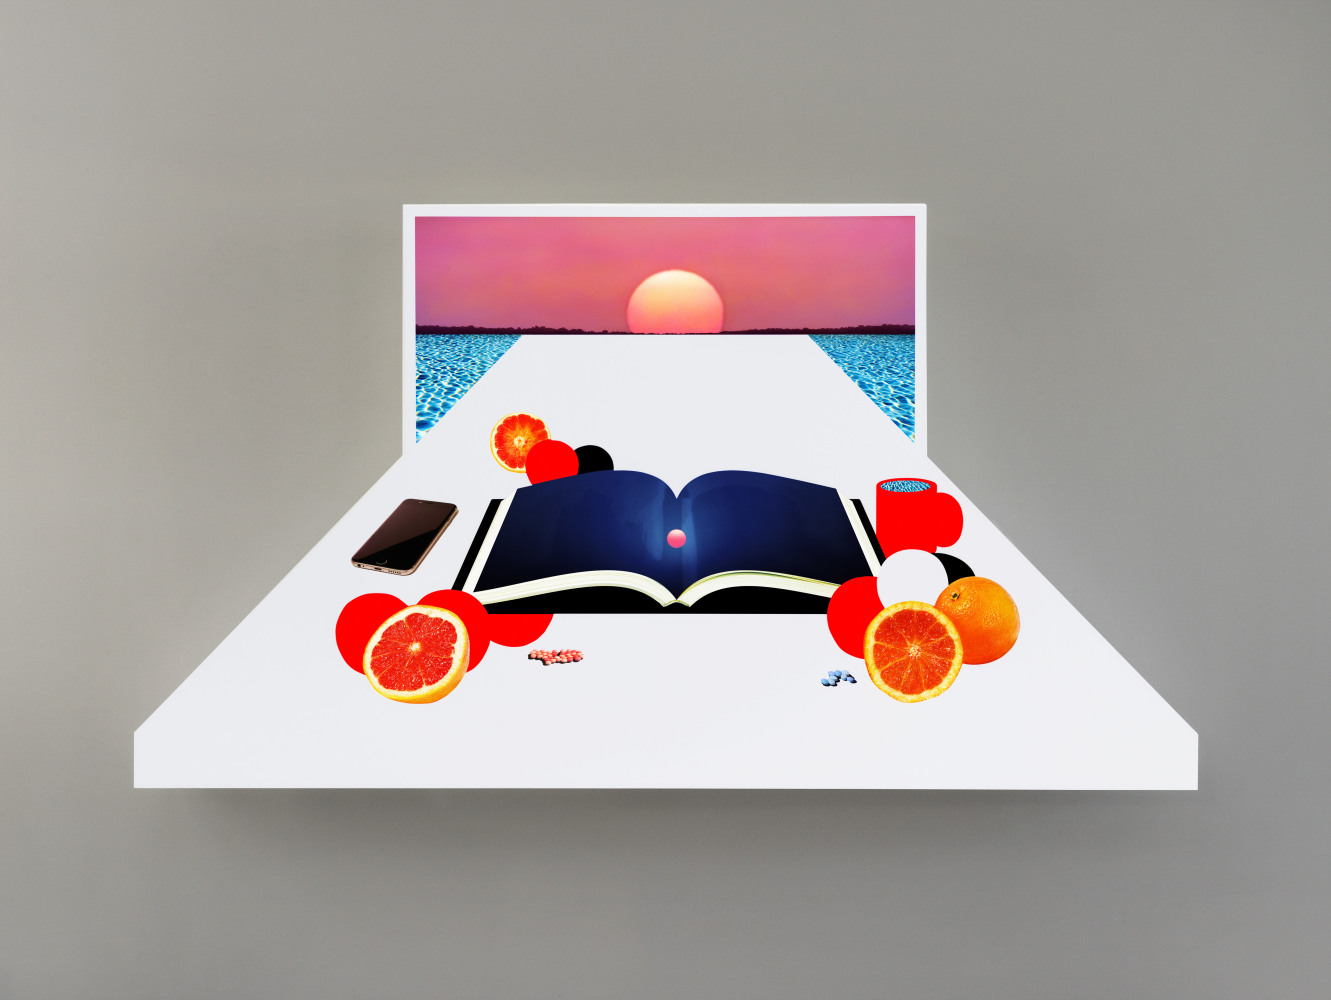 Doug Aitken

Still Life with Setting Sun

2020

Chromogenic transparency on acrylic in aluminum lightbox with LEDs

59 3/4 x 108 x 7 inches (151.8 x 274.3 x 17.8 cm)

Edition&amp;nbsp;of 4, with 2 AP

DA 636

&amp;nbsp;

INQUIRE